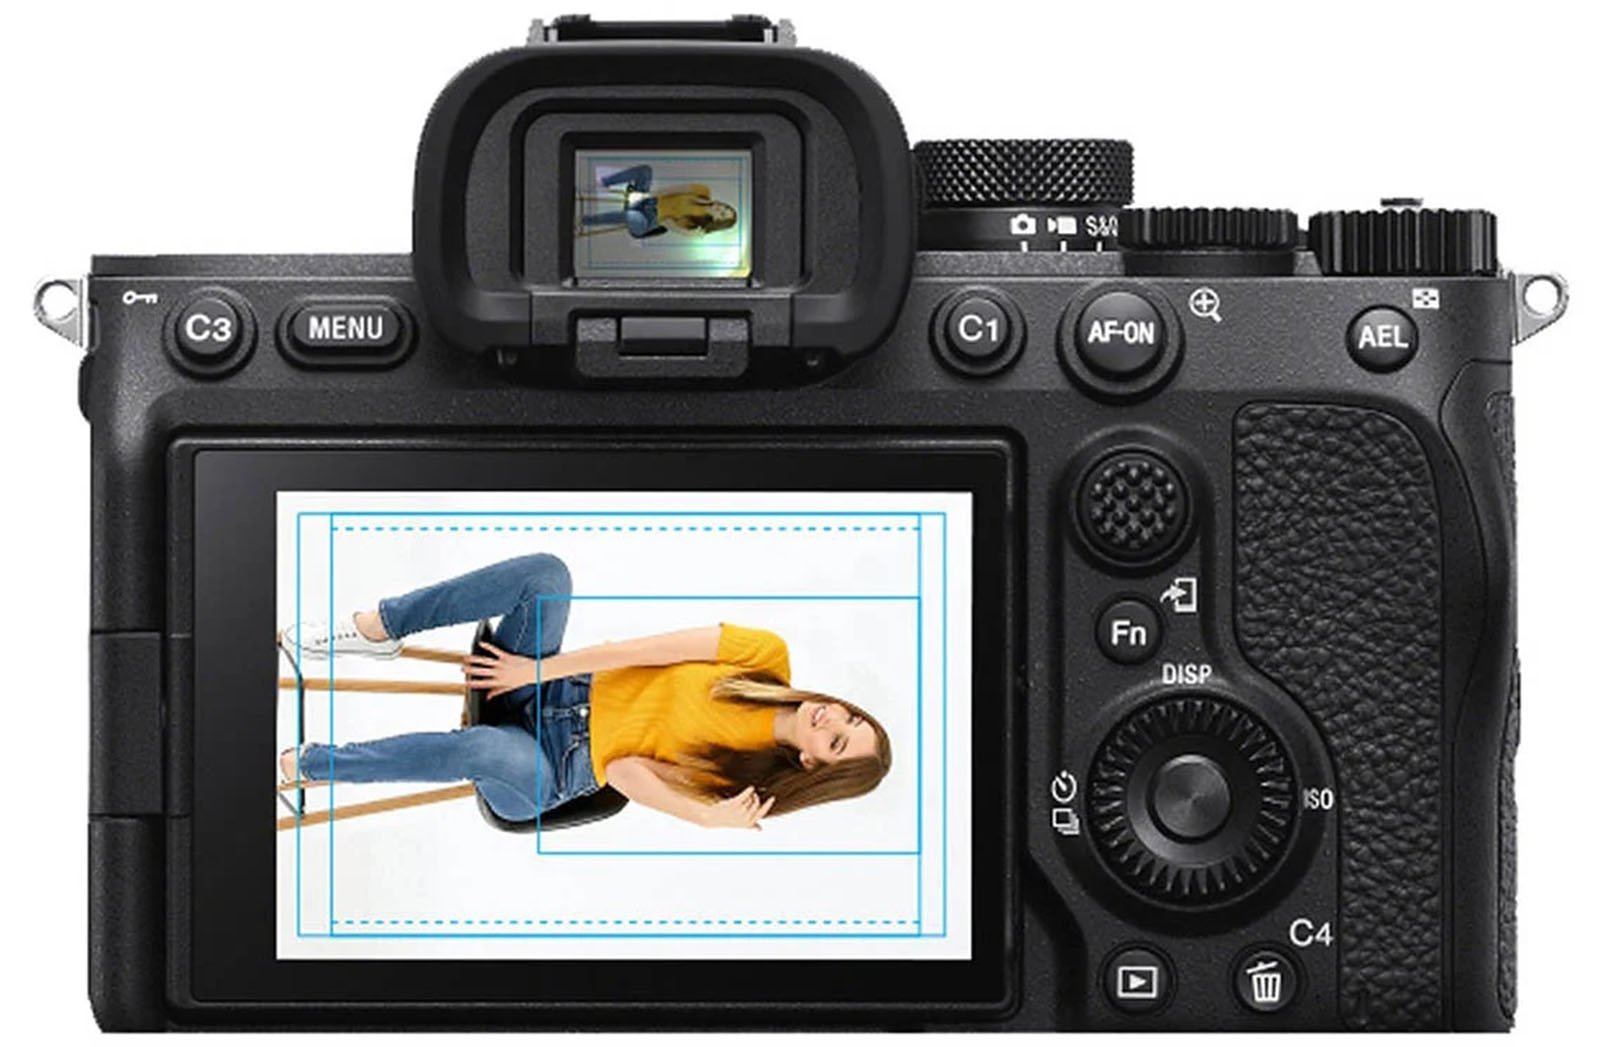 A digital camera's back view displaying its screen, which shows a photo of a smiling woman sitting on a stool, wearing a yellow top and jeans. various camera buttons are also visible.